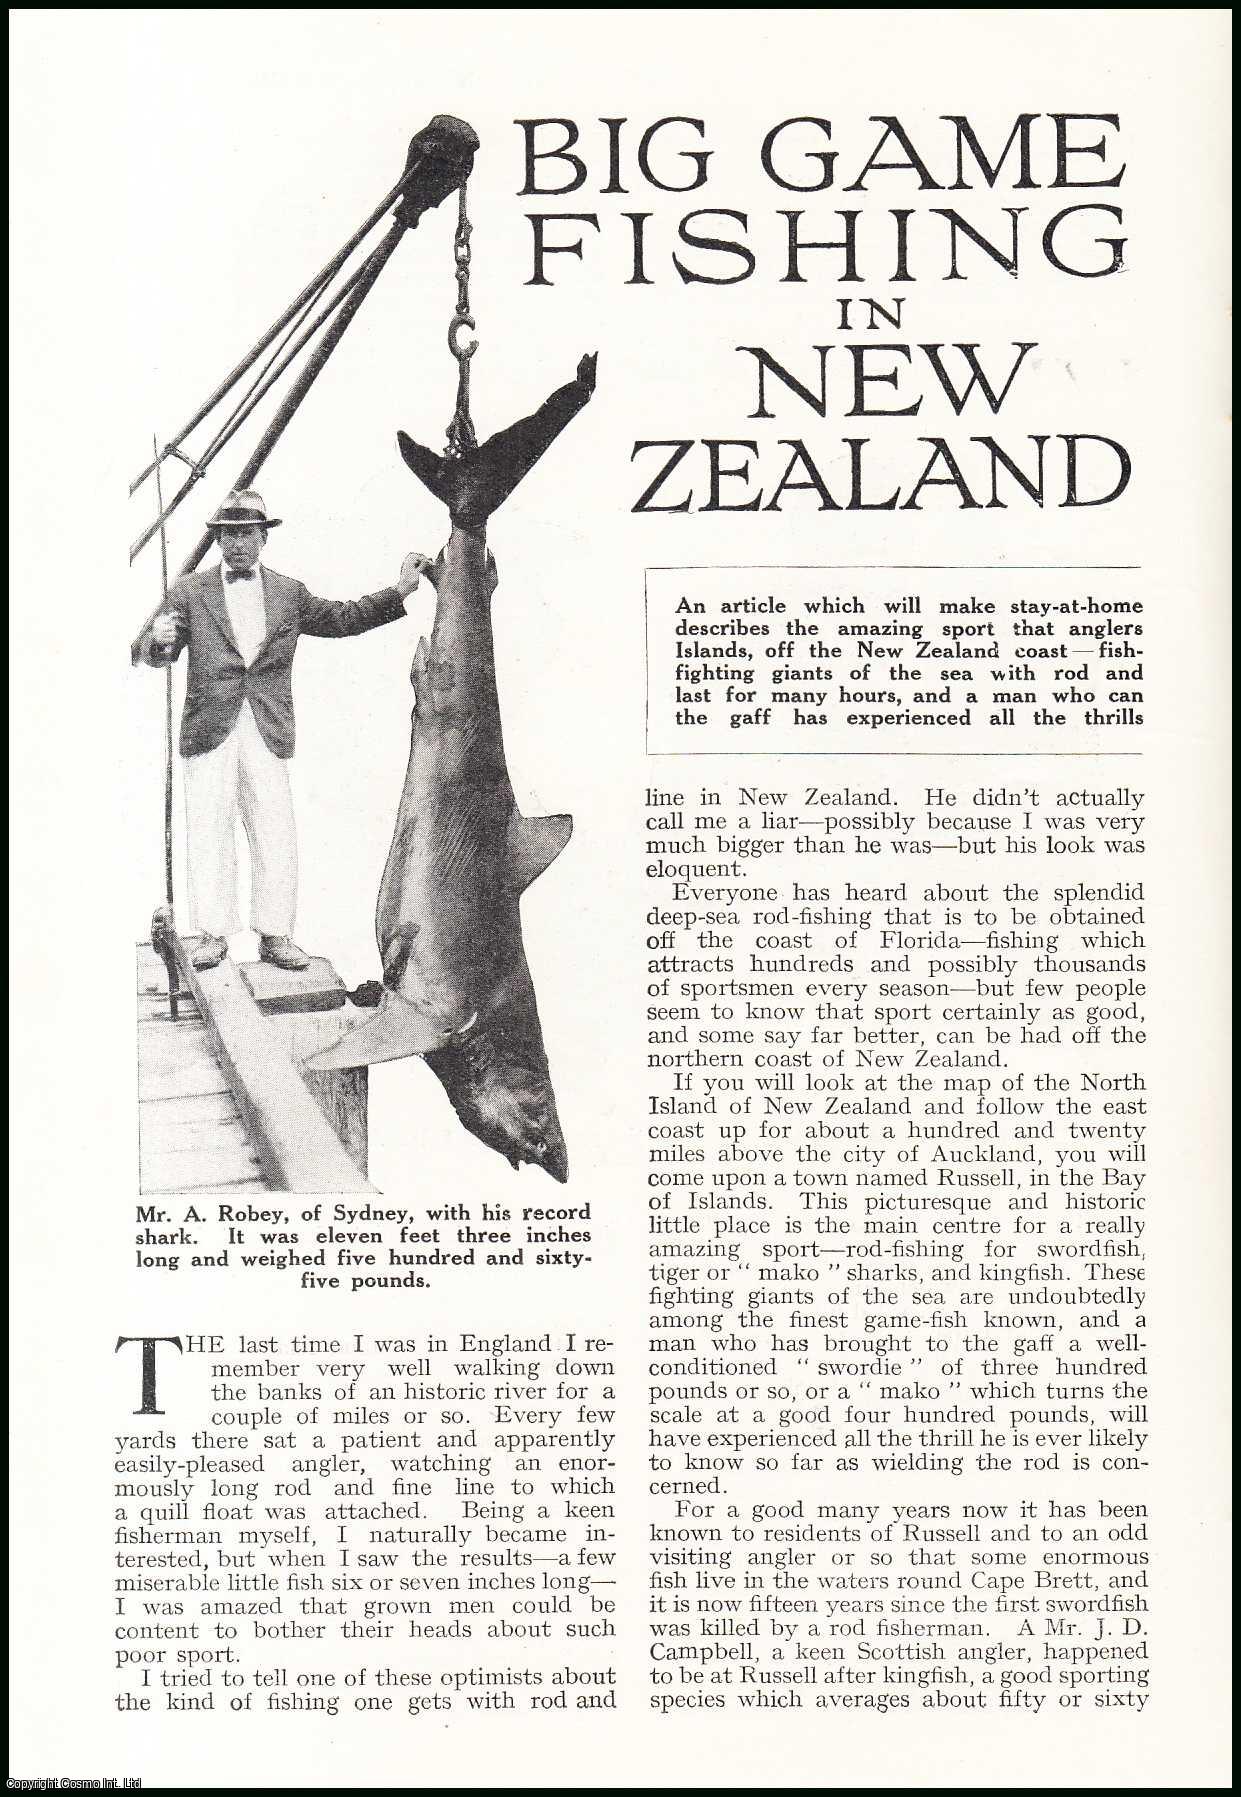 W.W. Dunsterville of Christchurch, New Zealand. - Big Game Fishing in New Zealand : after swordfish & tiger sharks with rod & line. An uncommon original article from the Wide World Magazine, 1926.